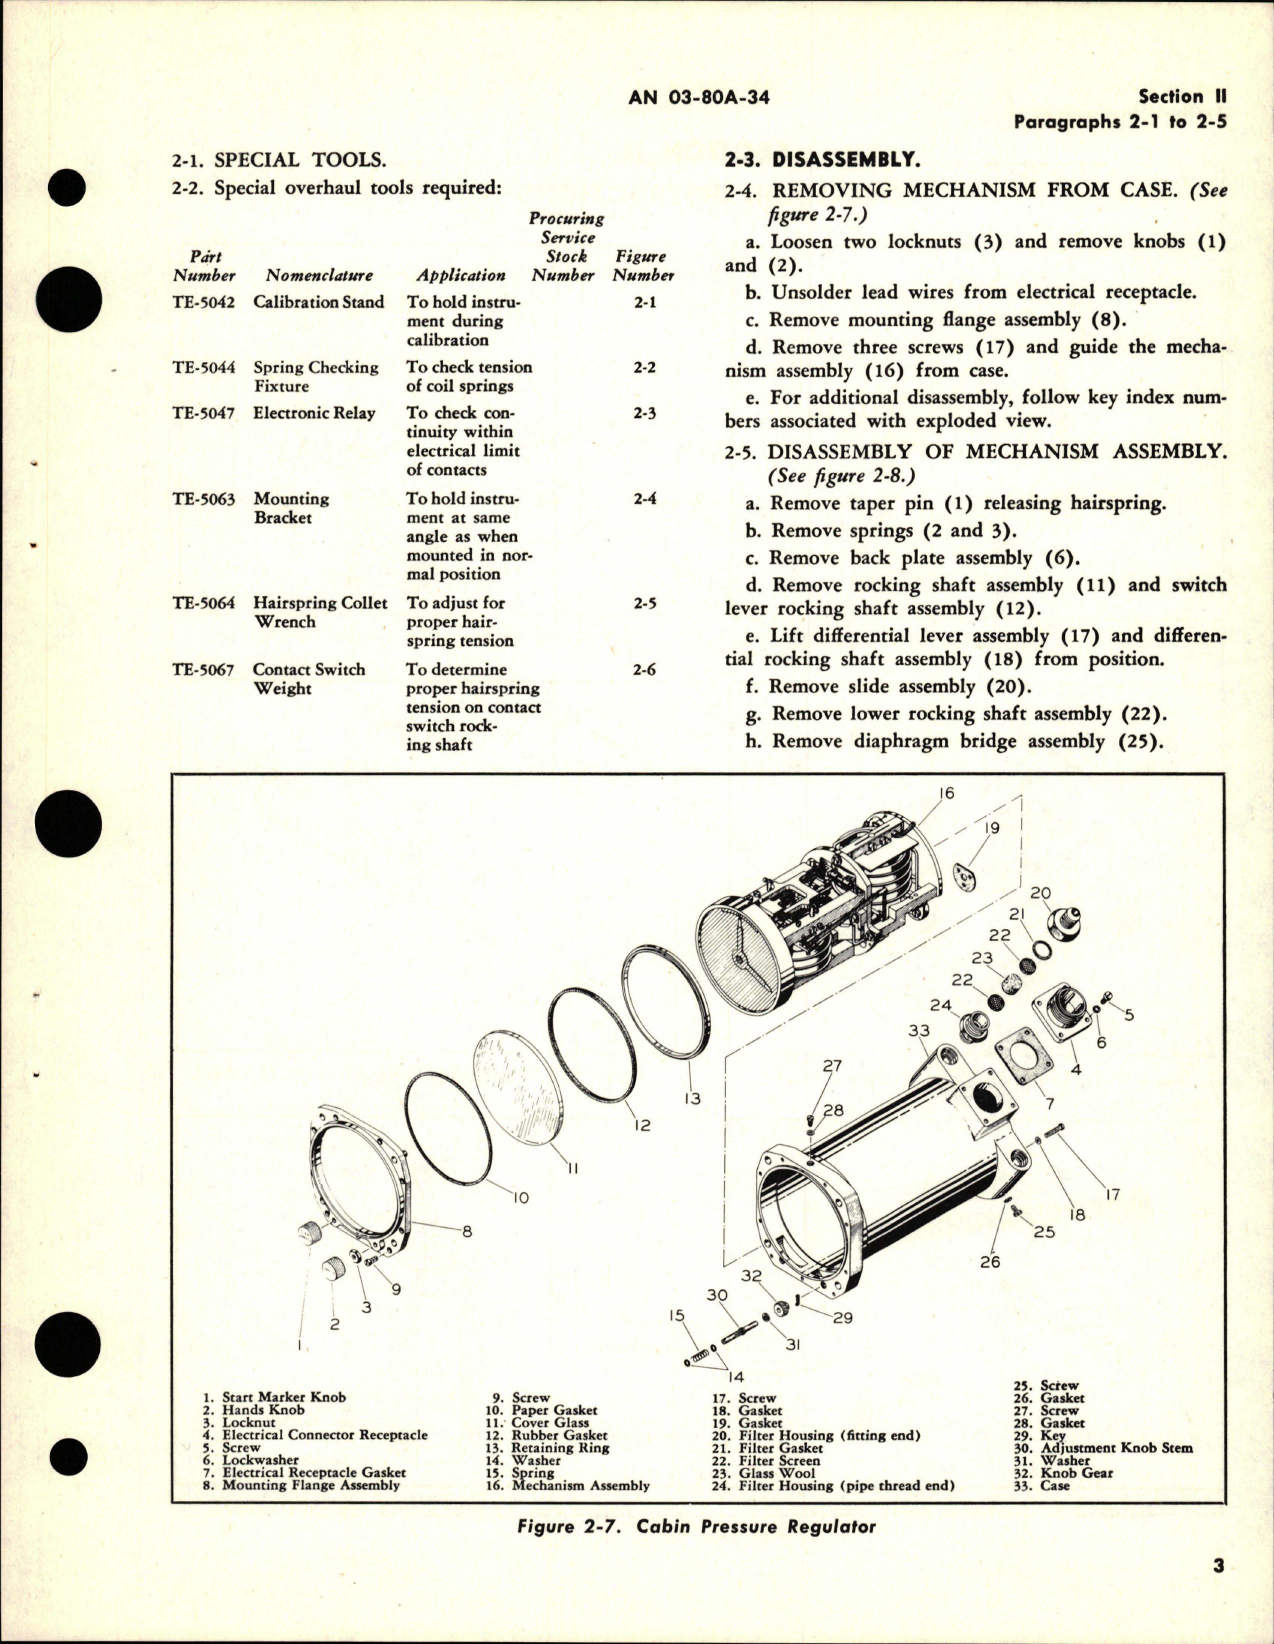 Sample page 7 from AirCorps Library document: Overhaul Instructions for Cabin Pressure Regulator 